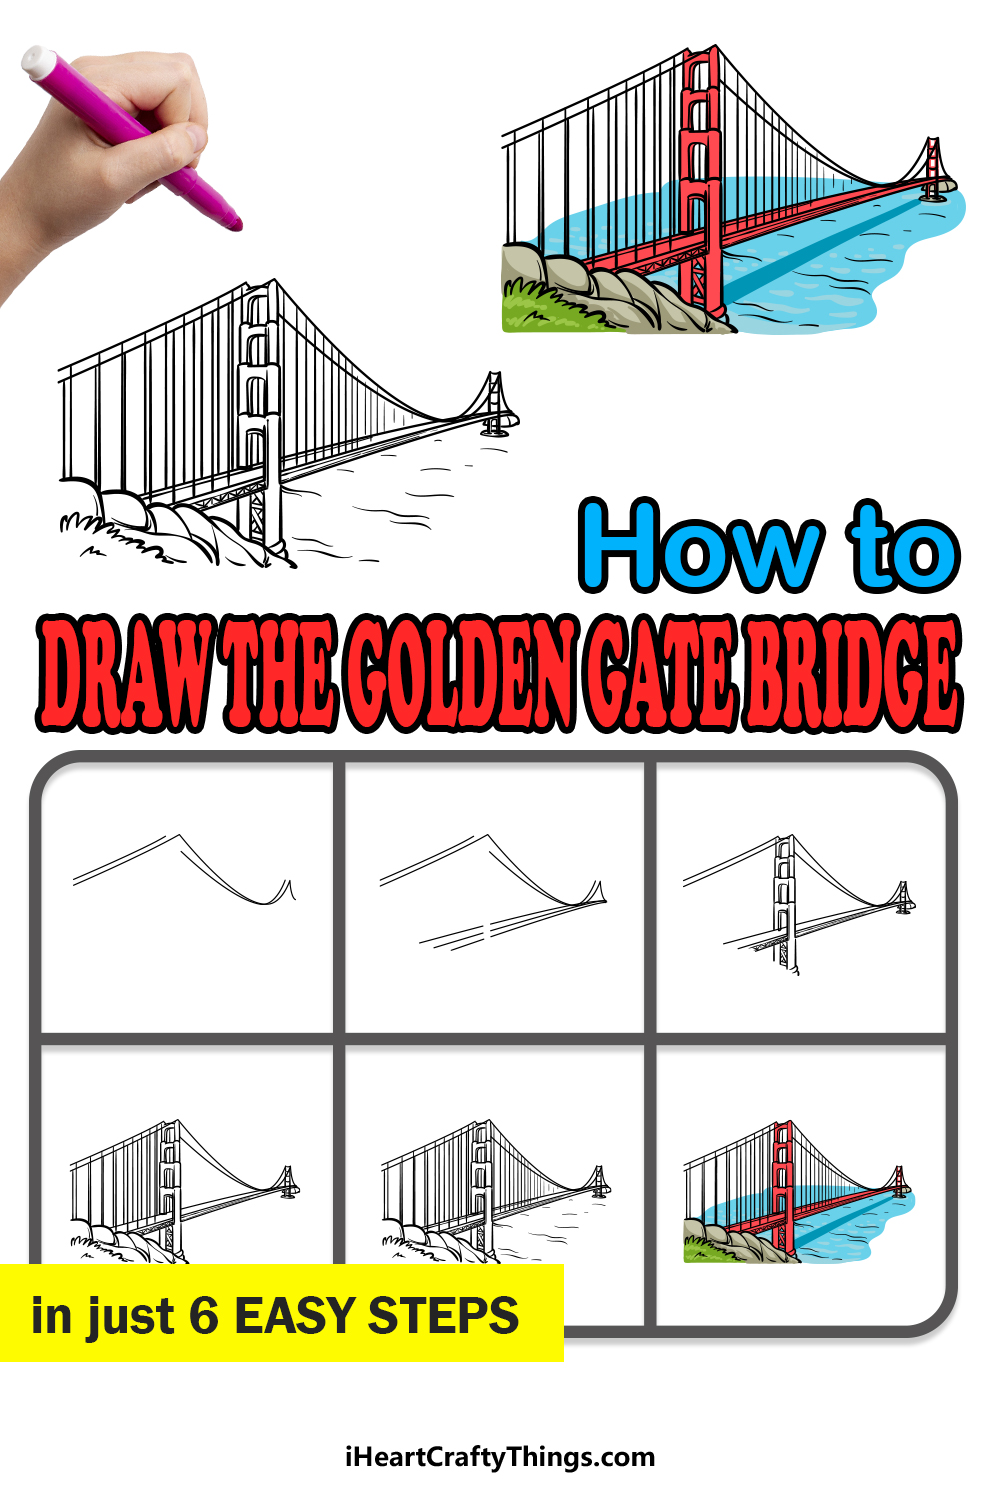 how to draw The Golden Gate Bridge in 6 easy steps